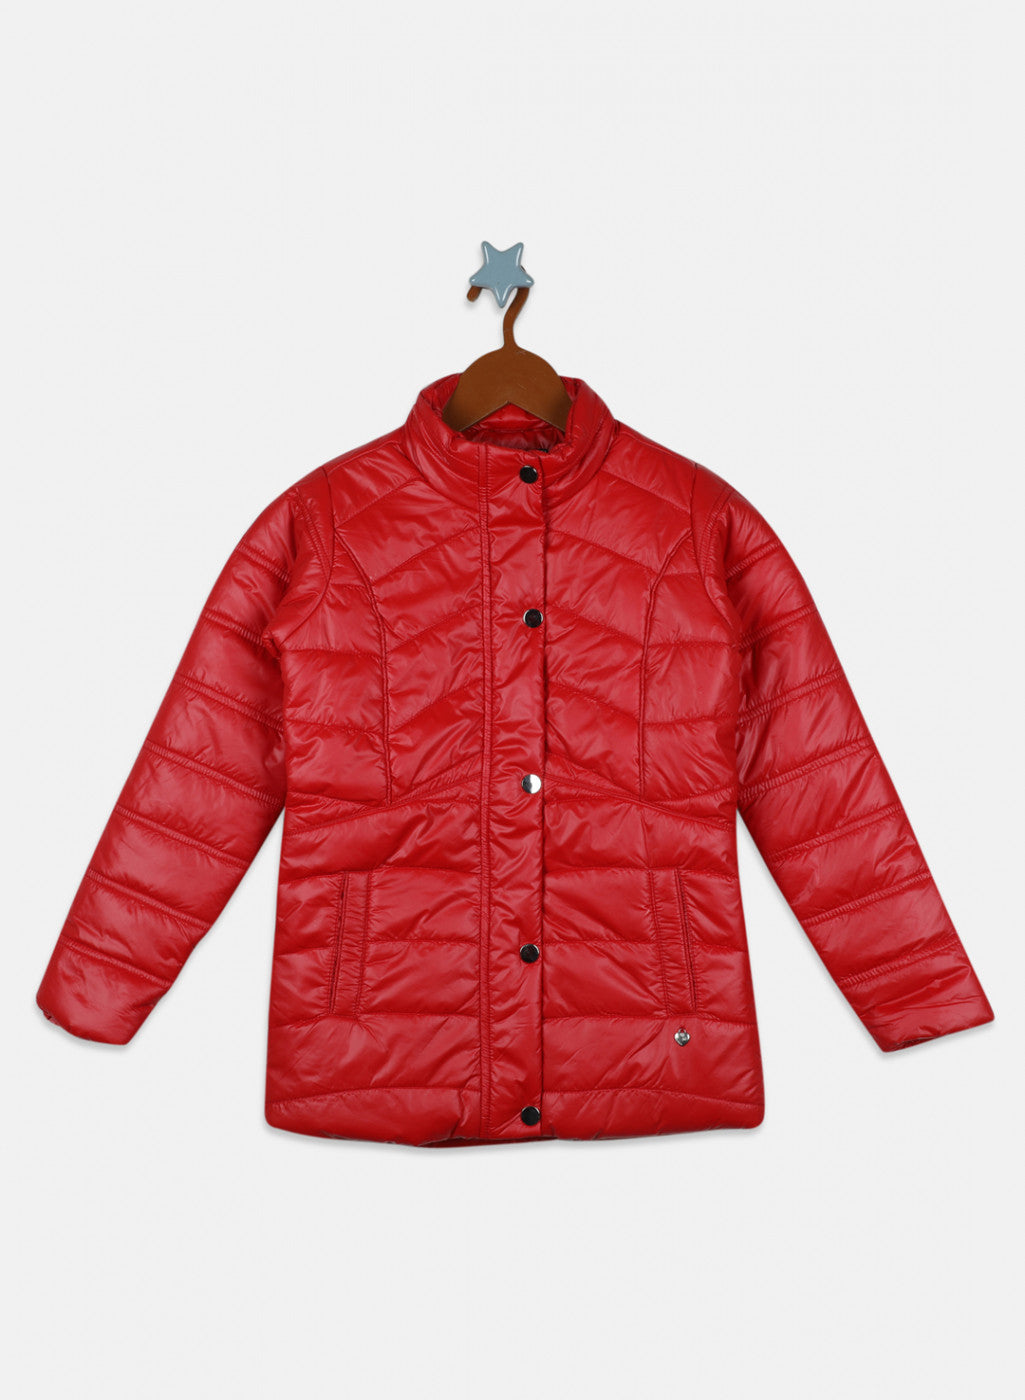 Girls Red Solid Jacket